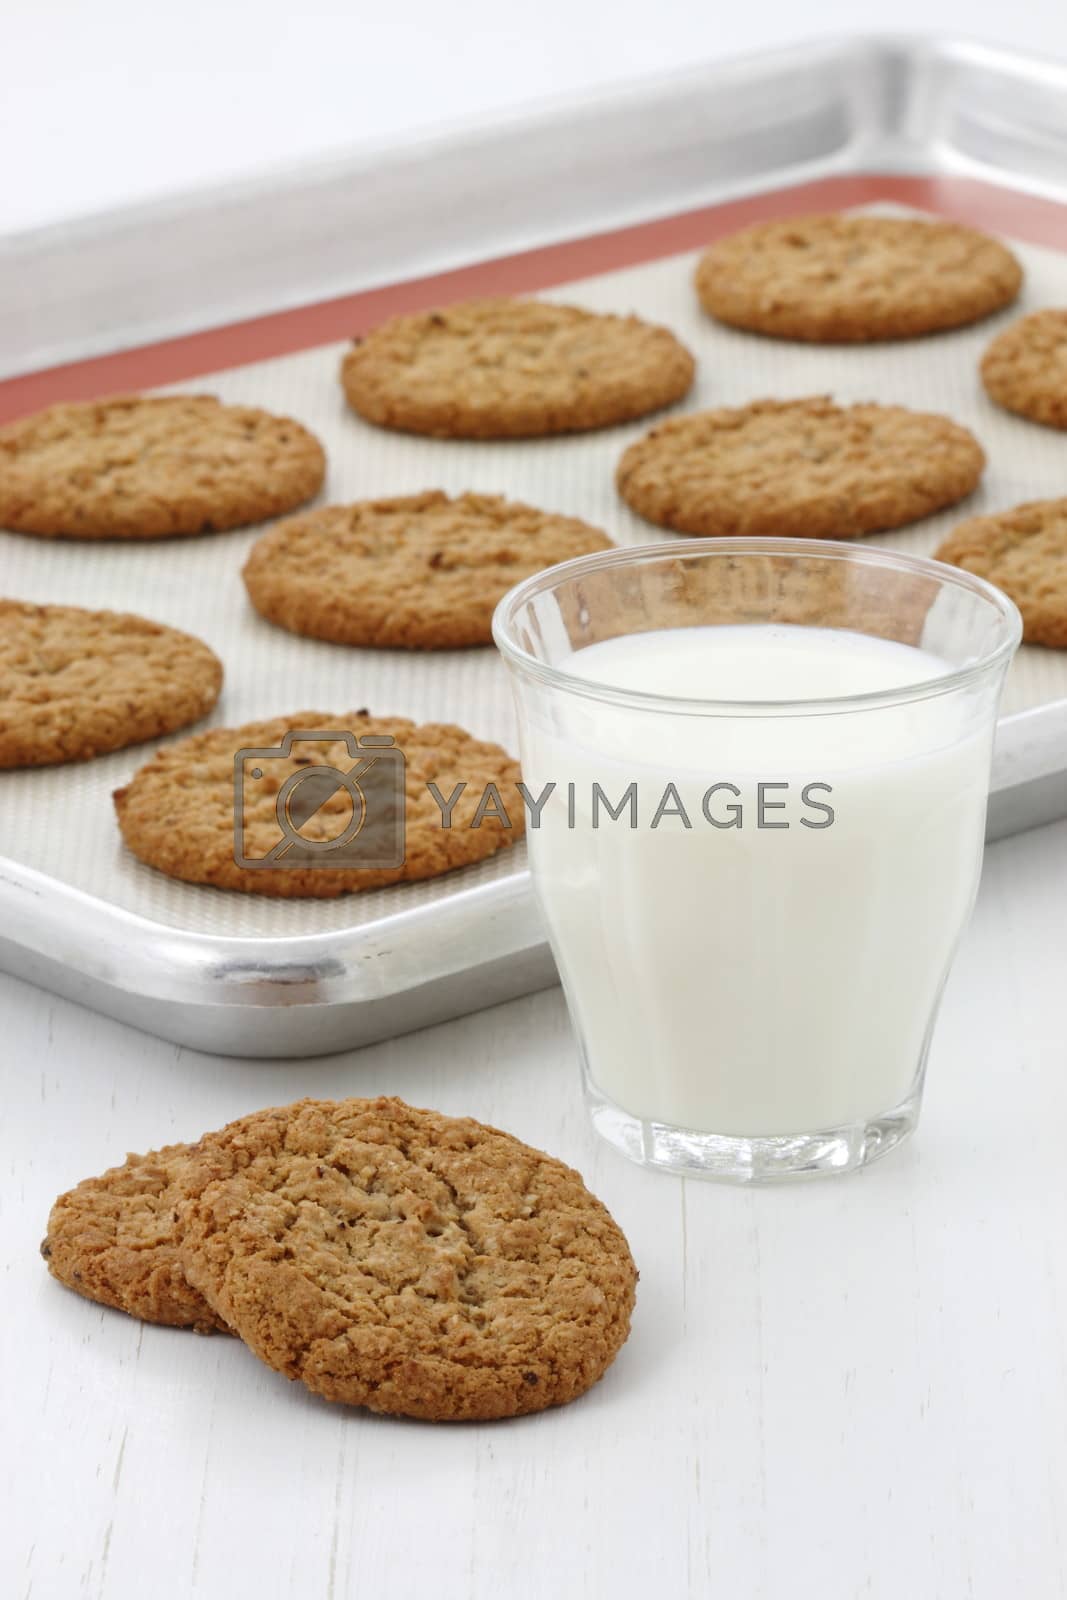 Royalty free image of Fresh baked oatmeal cookies by tacar